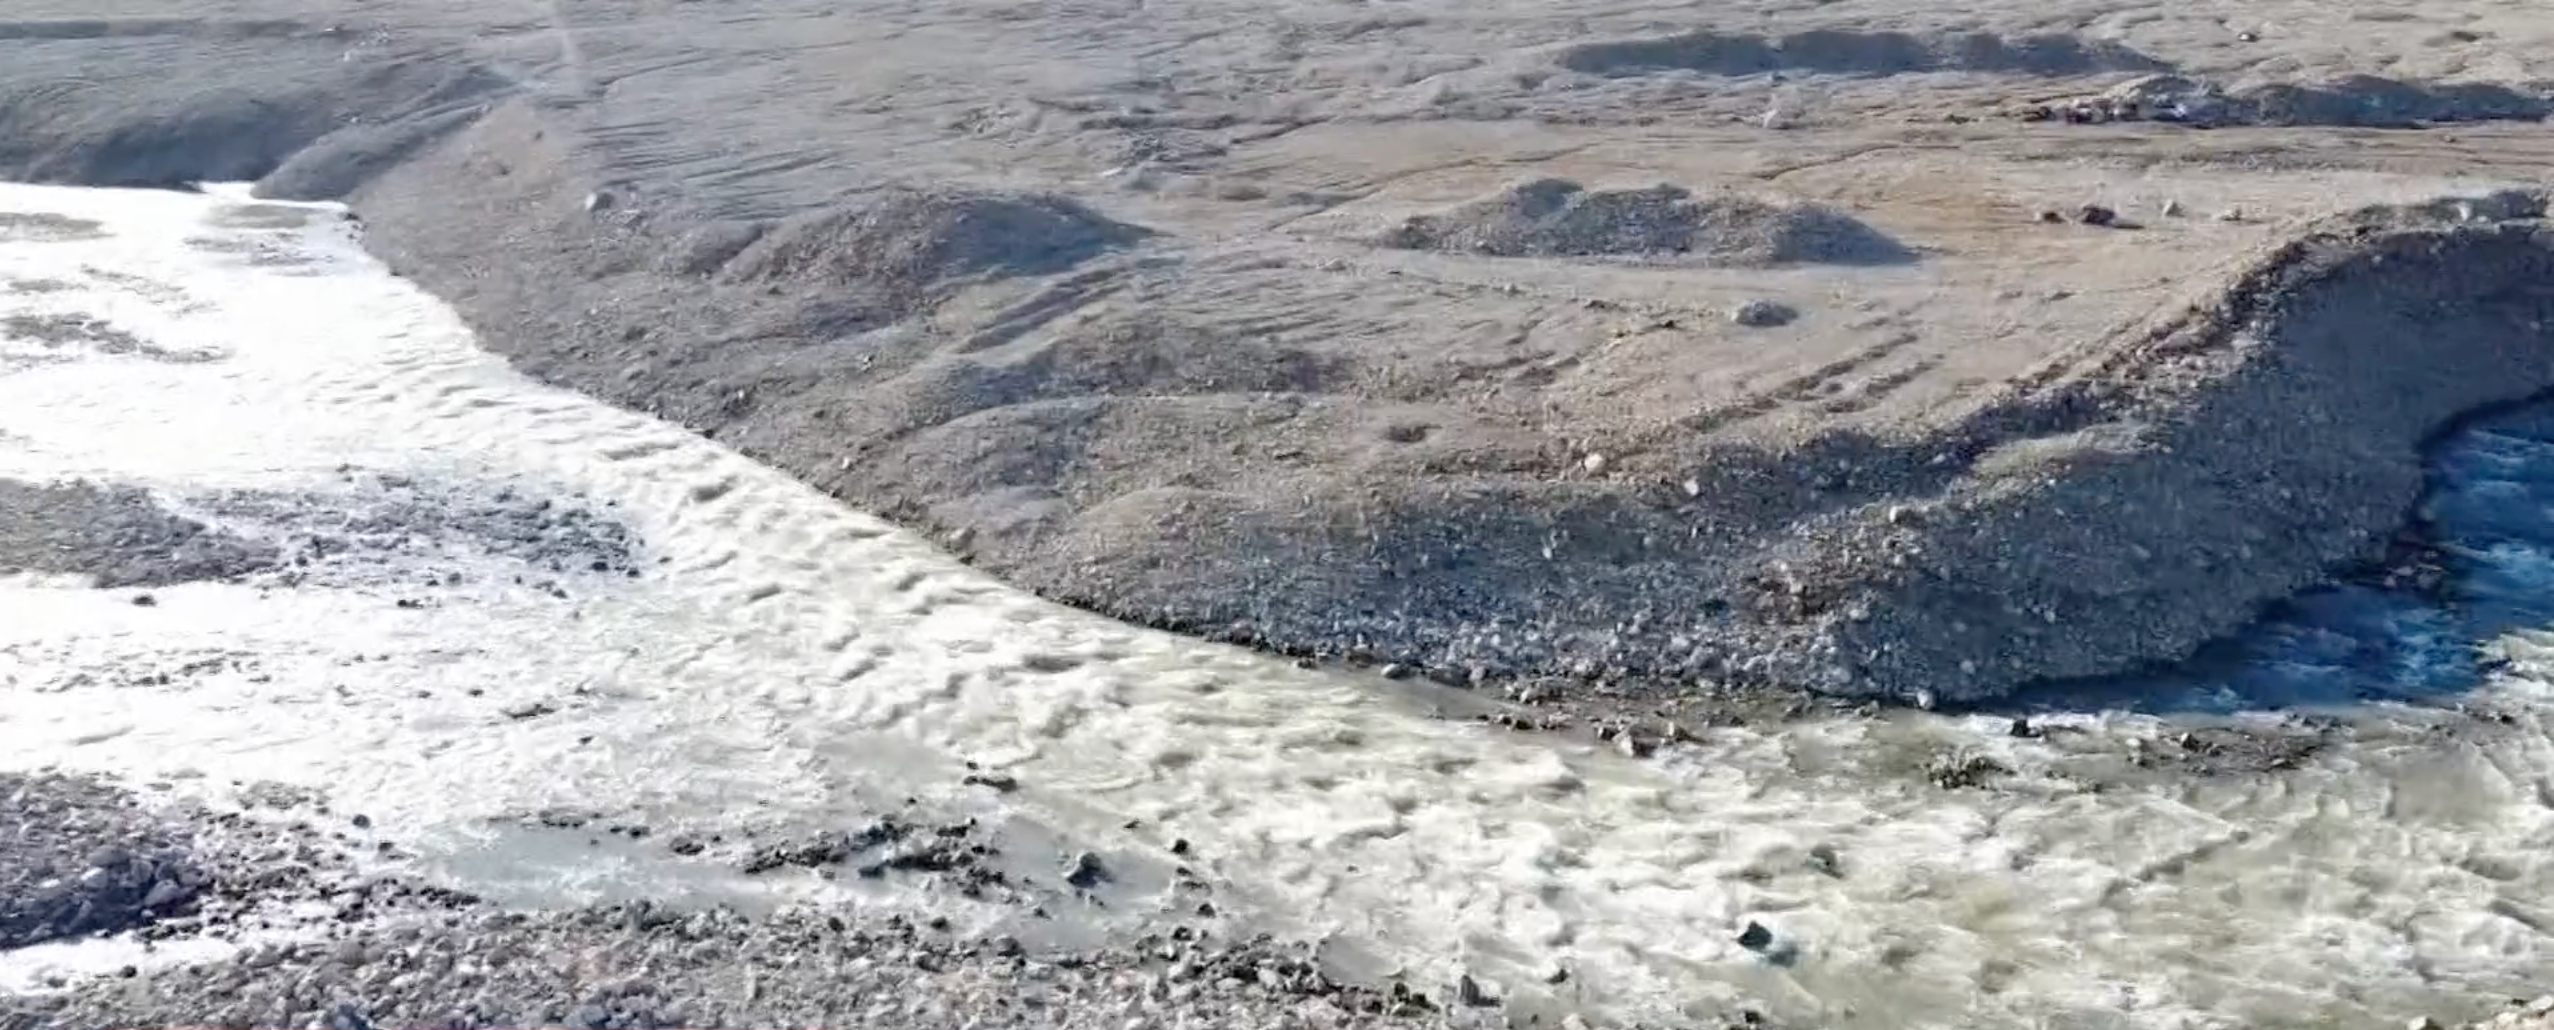 Water rushes over Greenland as the icy island experiences a heatwave